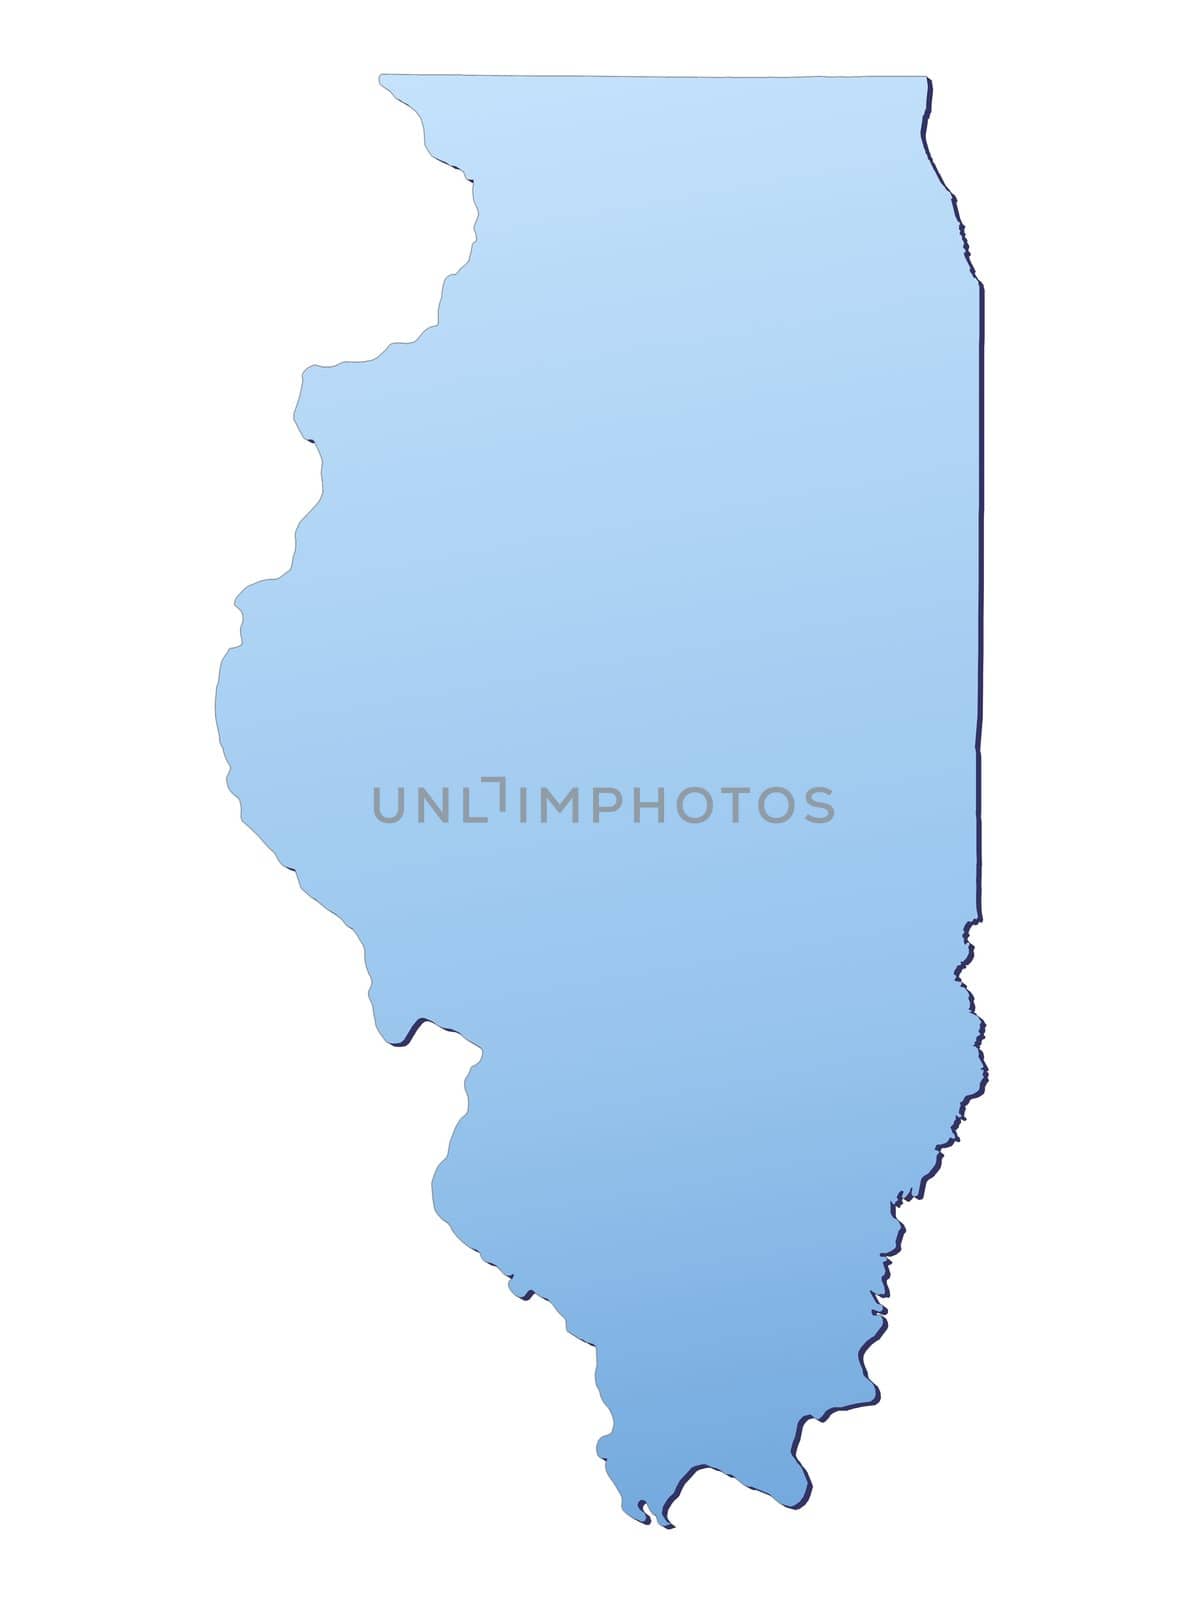 Illinois(USA) map by skvoor